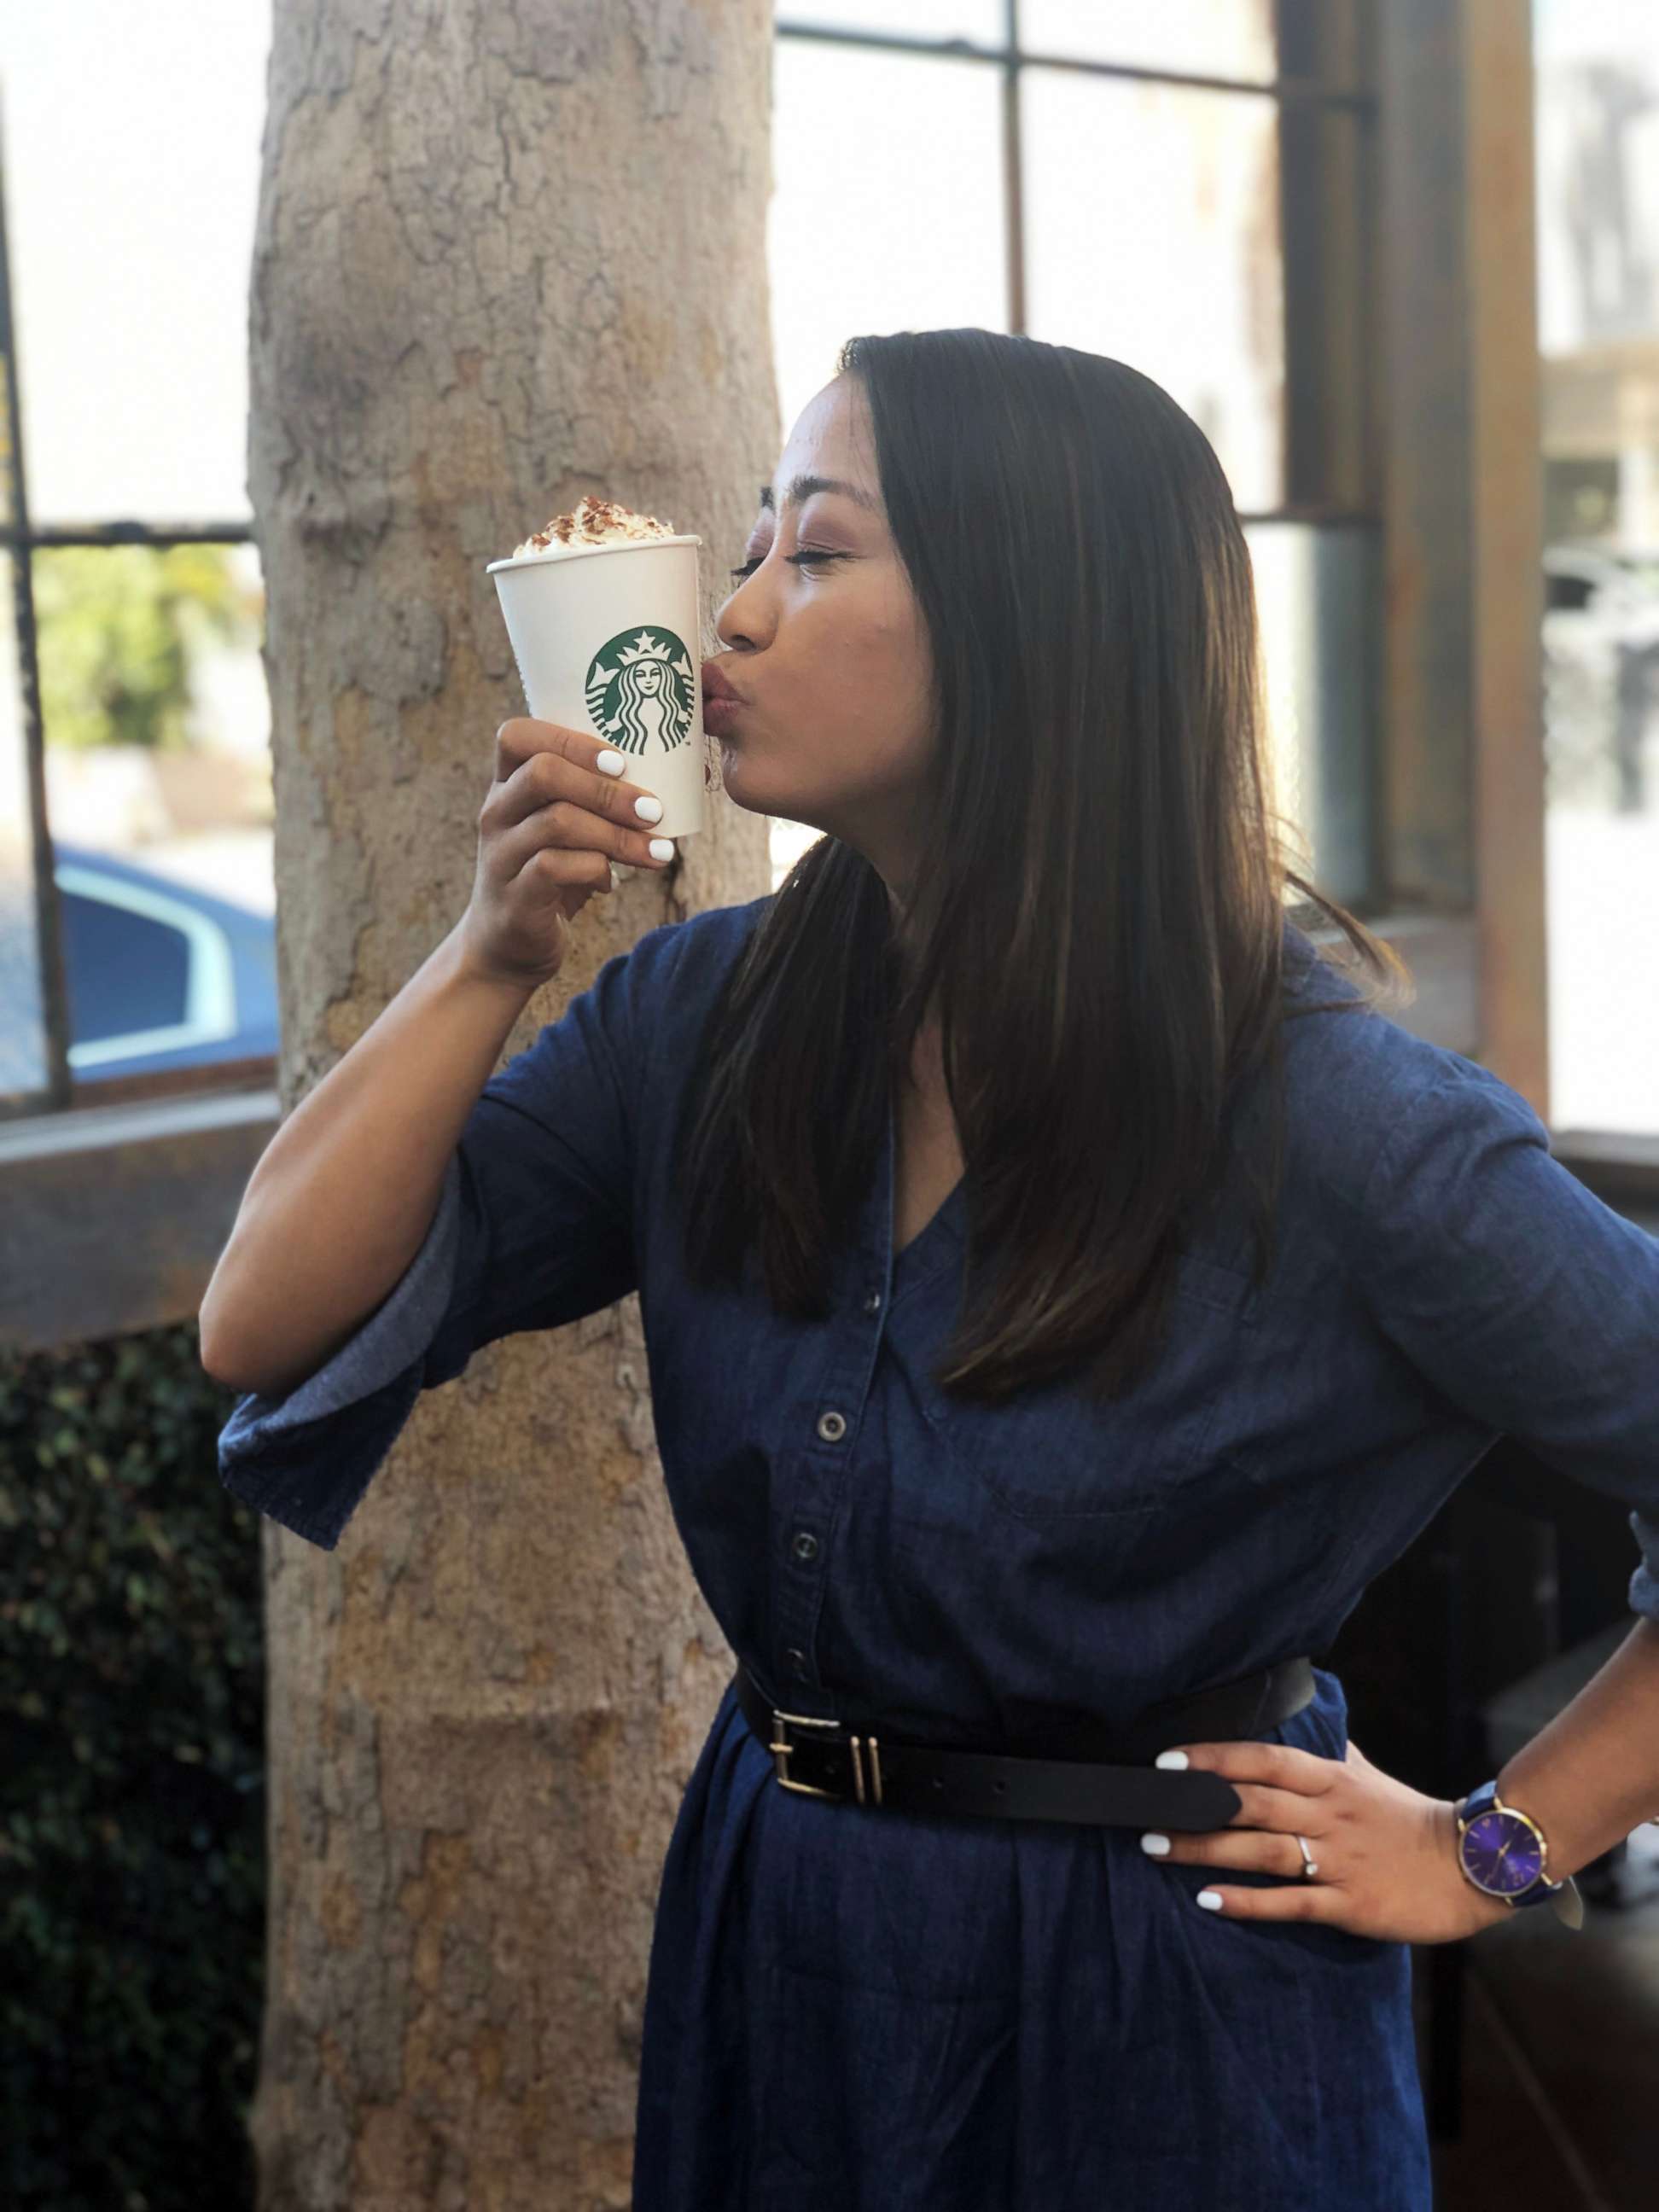 PHOTO: ABC News Fellow Angeline Bernabe holds a Pumpkin Spice Latte at a Starbucks location on Melrose Avenue in Los Angeles.